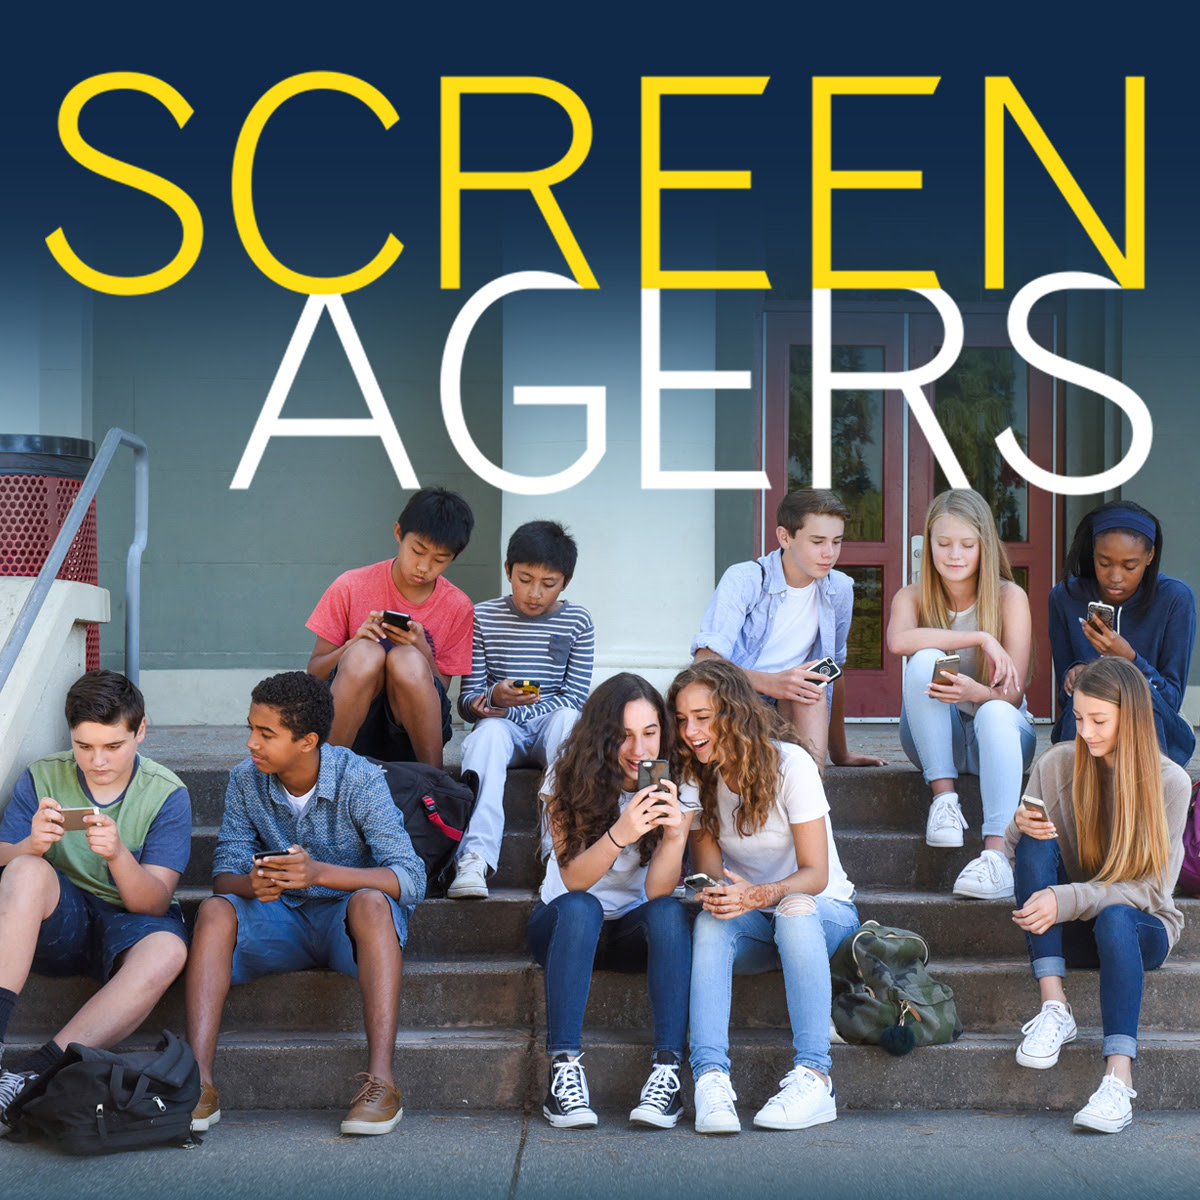 Screenagers Film Presented By Holy Family Catholic Community